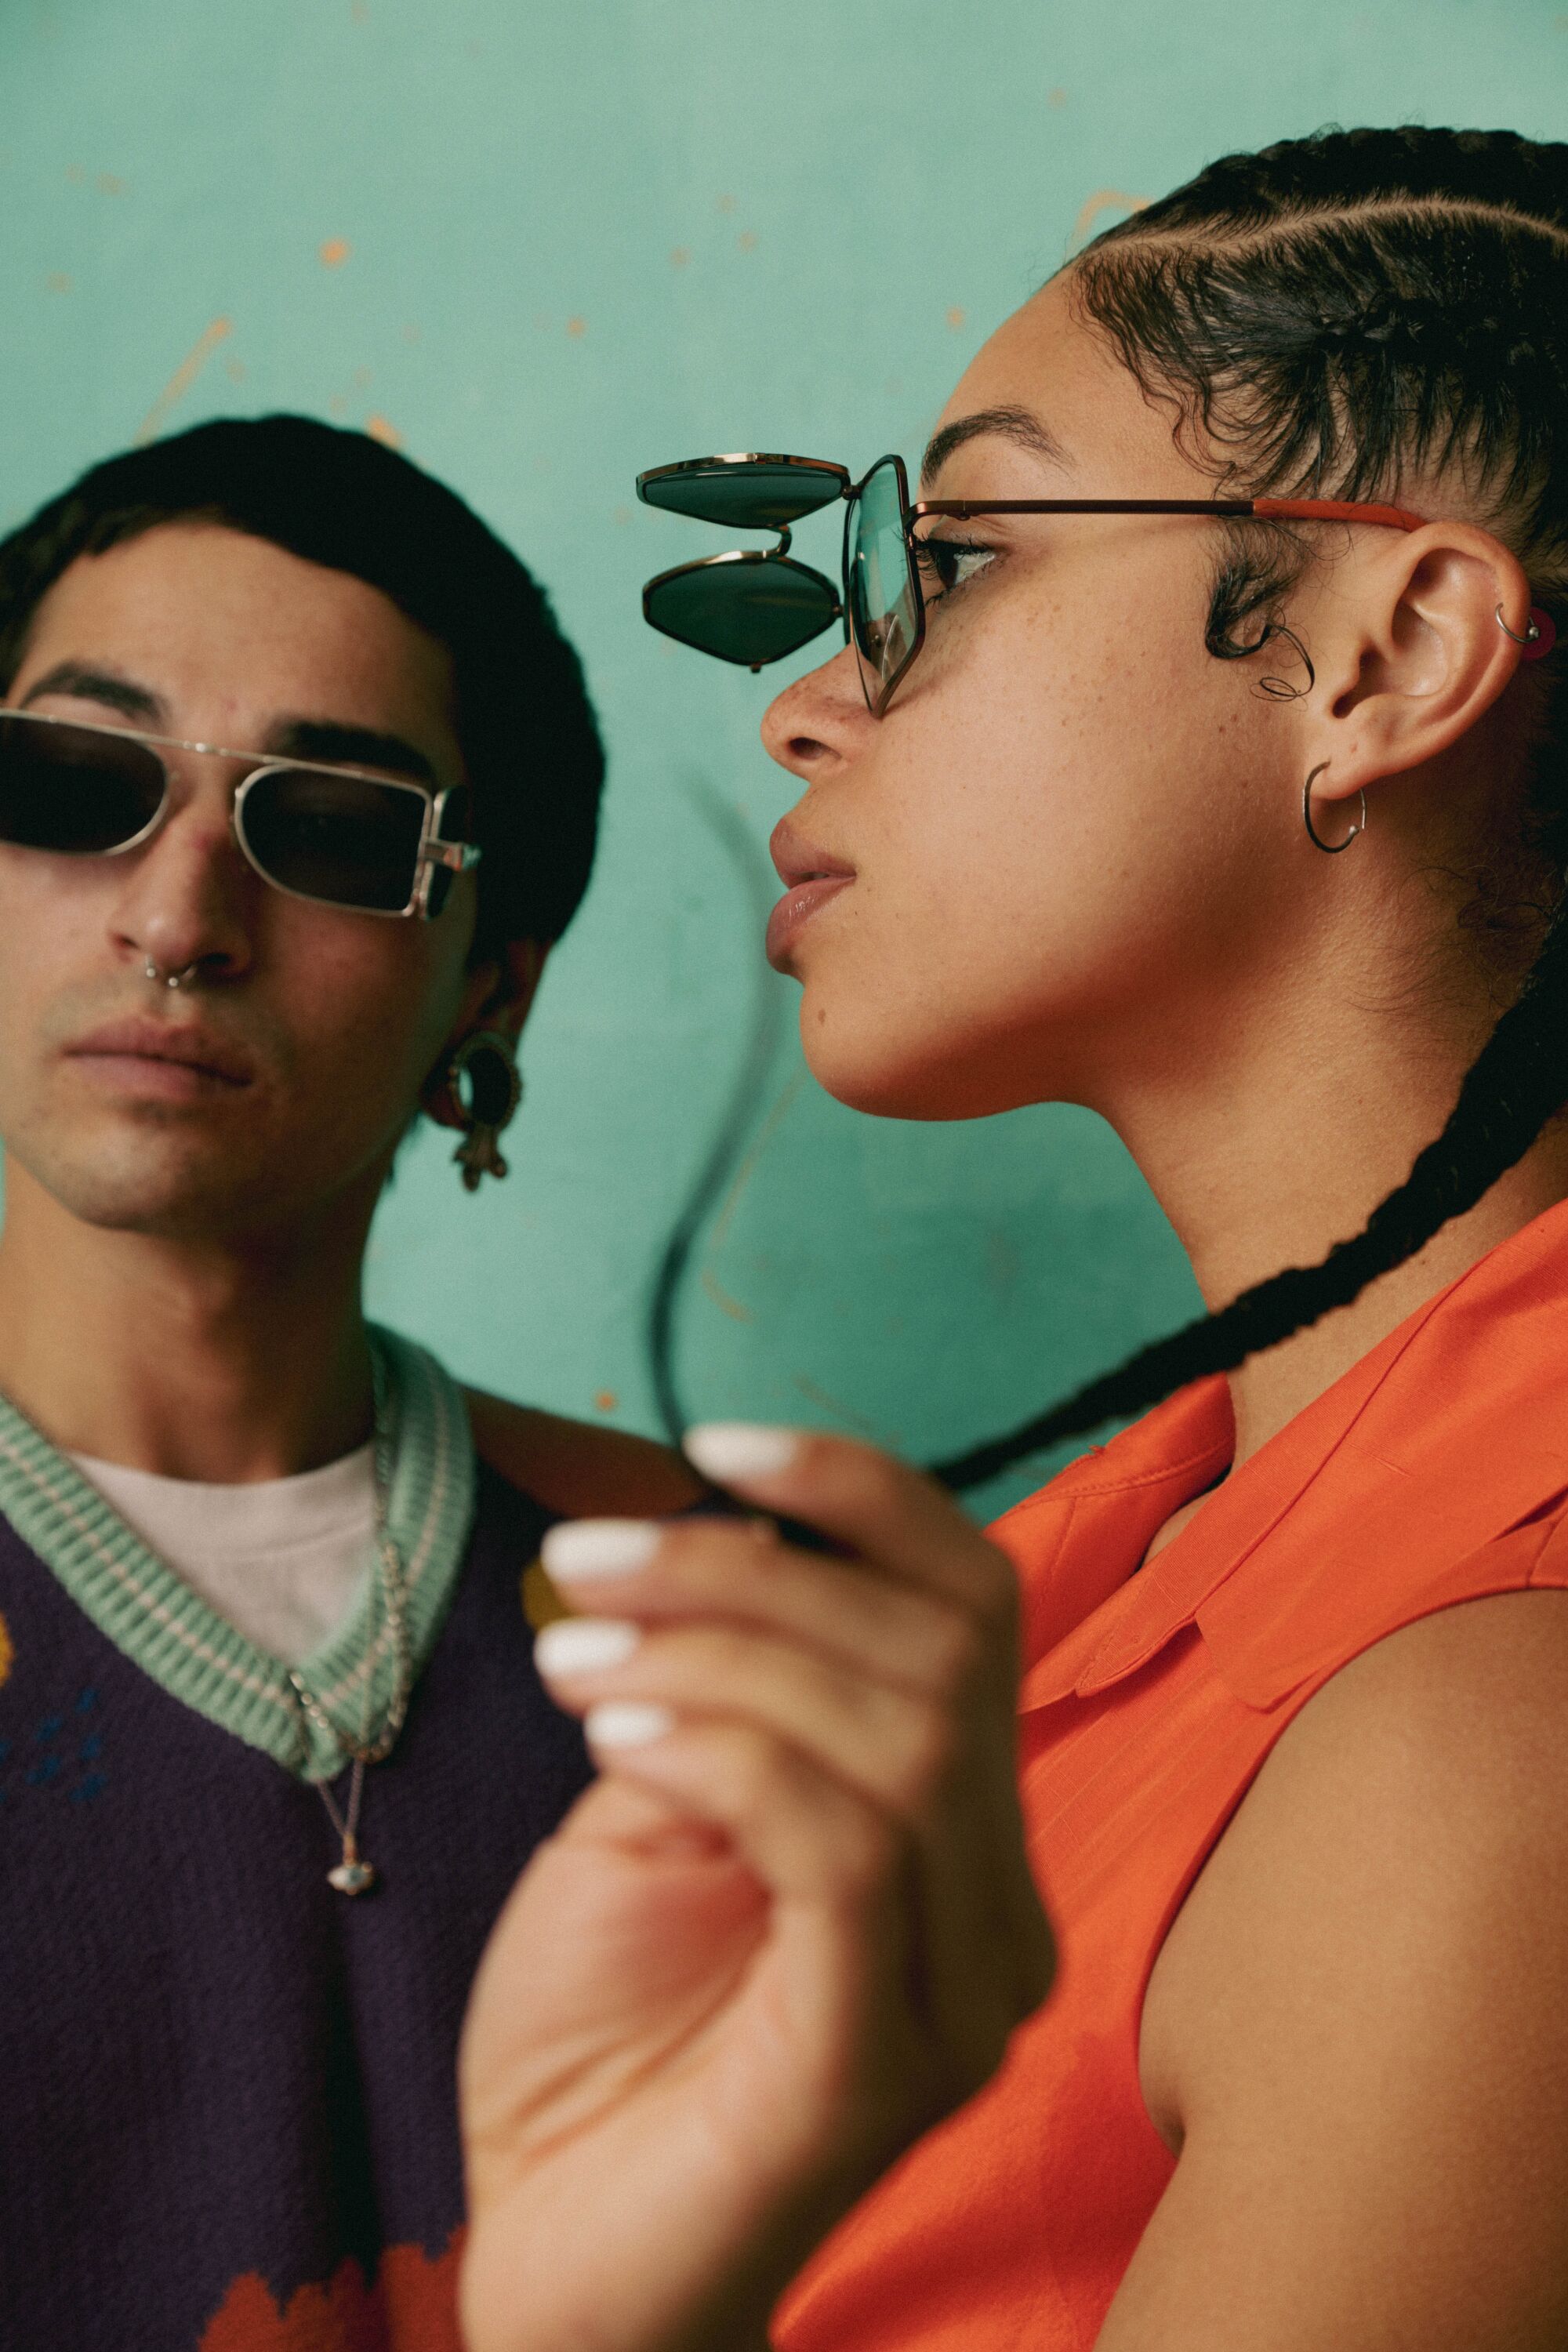 Gabrielle Ebron and Xochi Chimalli pose in front of a teal backdrop wearing l.a.Eyeworks sunglasses